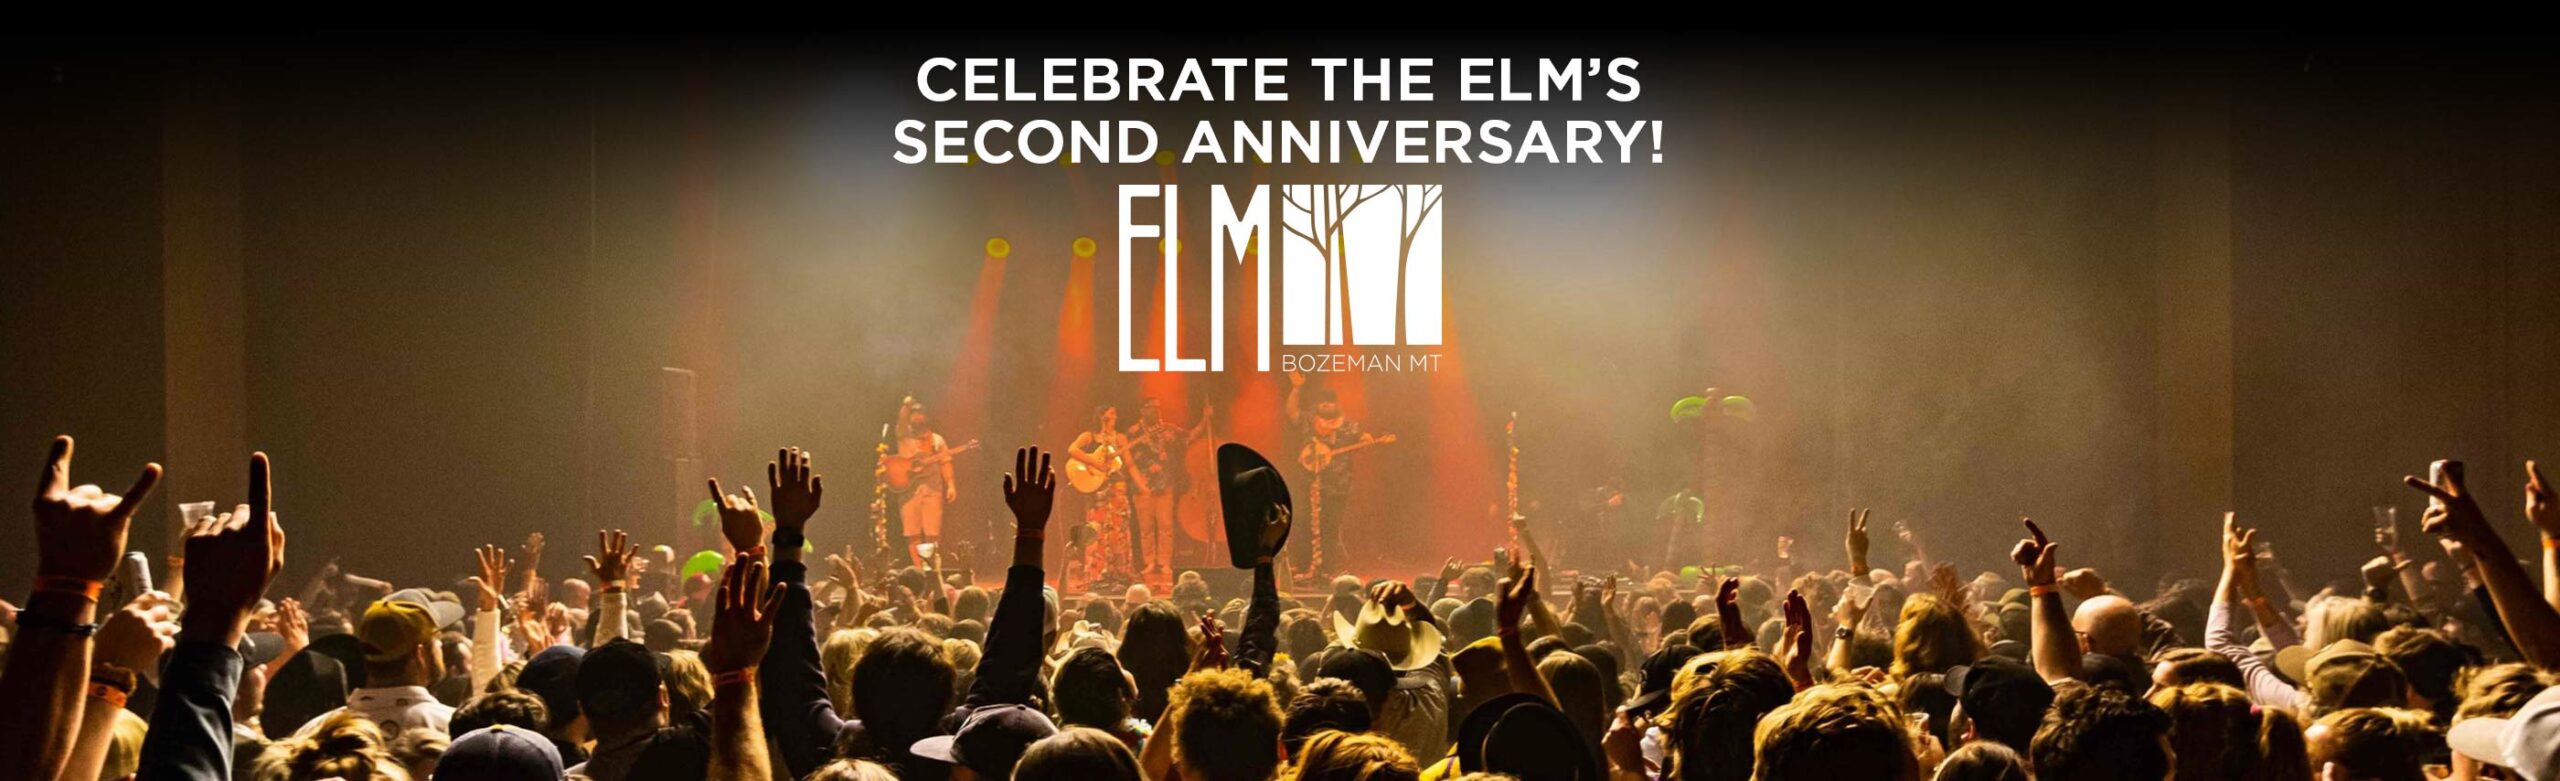 Celebrate The ELM’s 2nd Anniversary with Us! Image